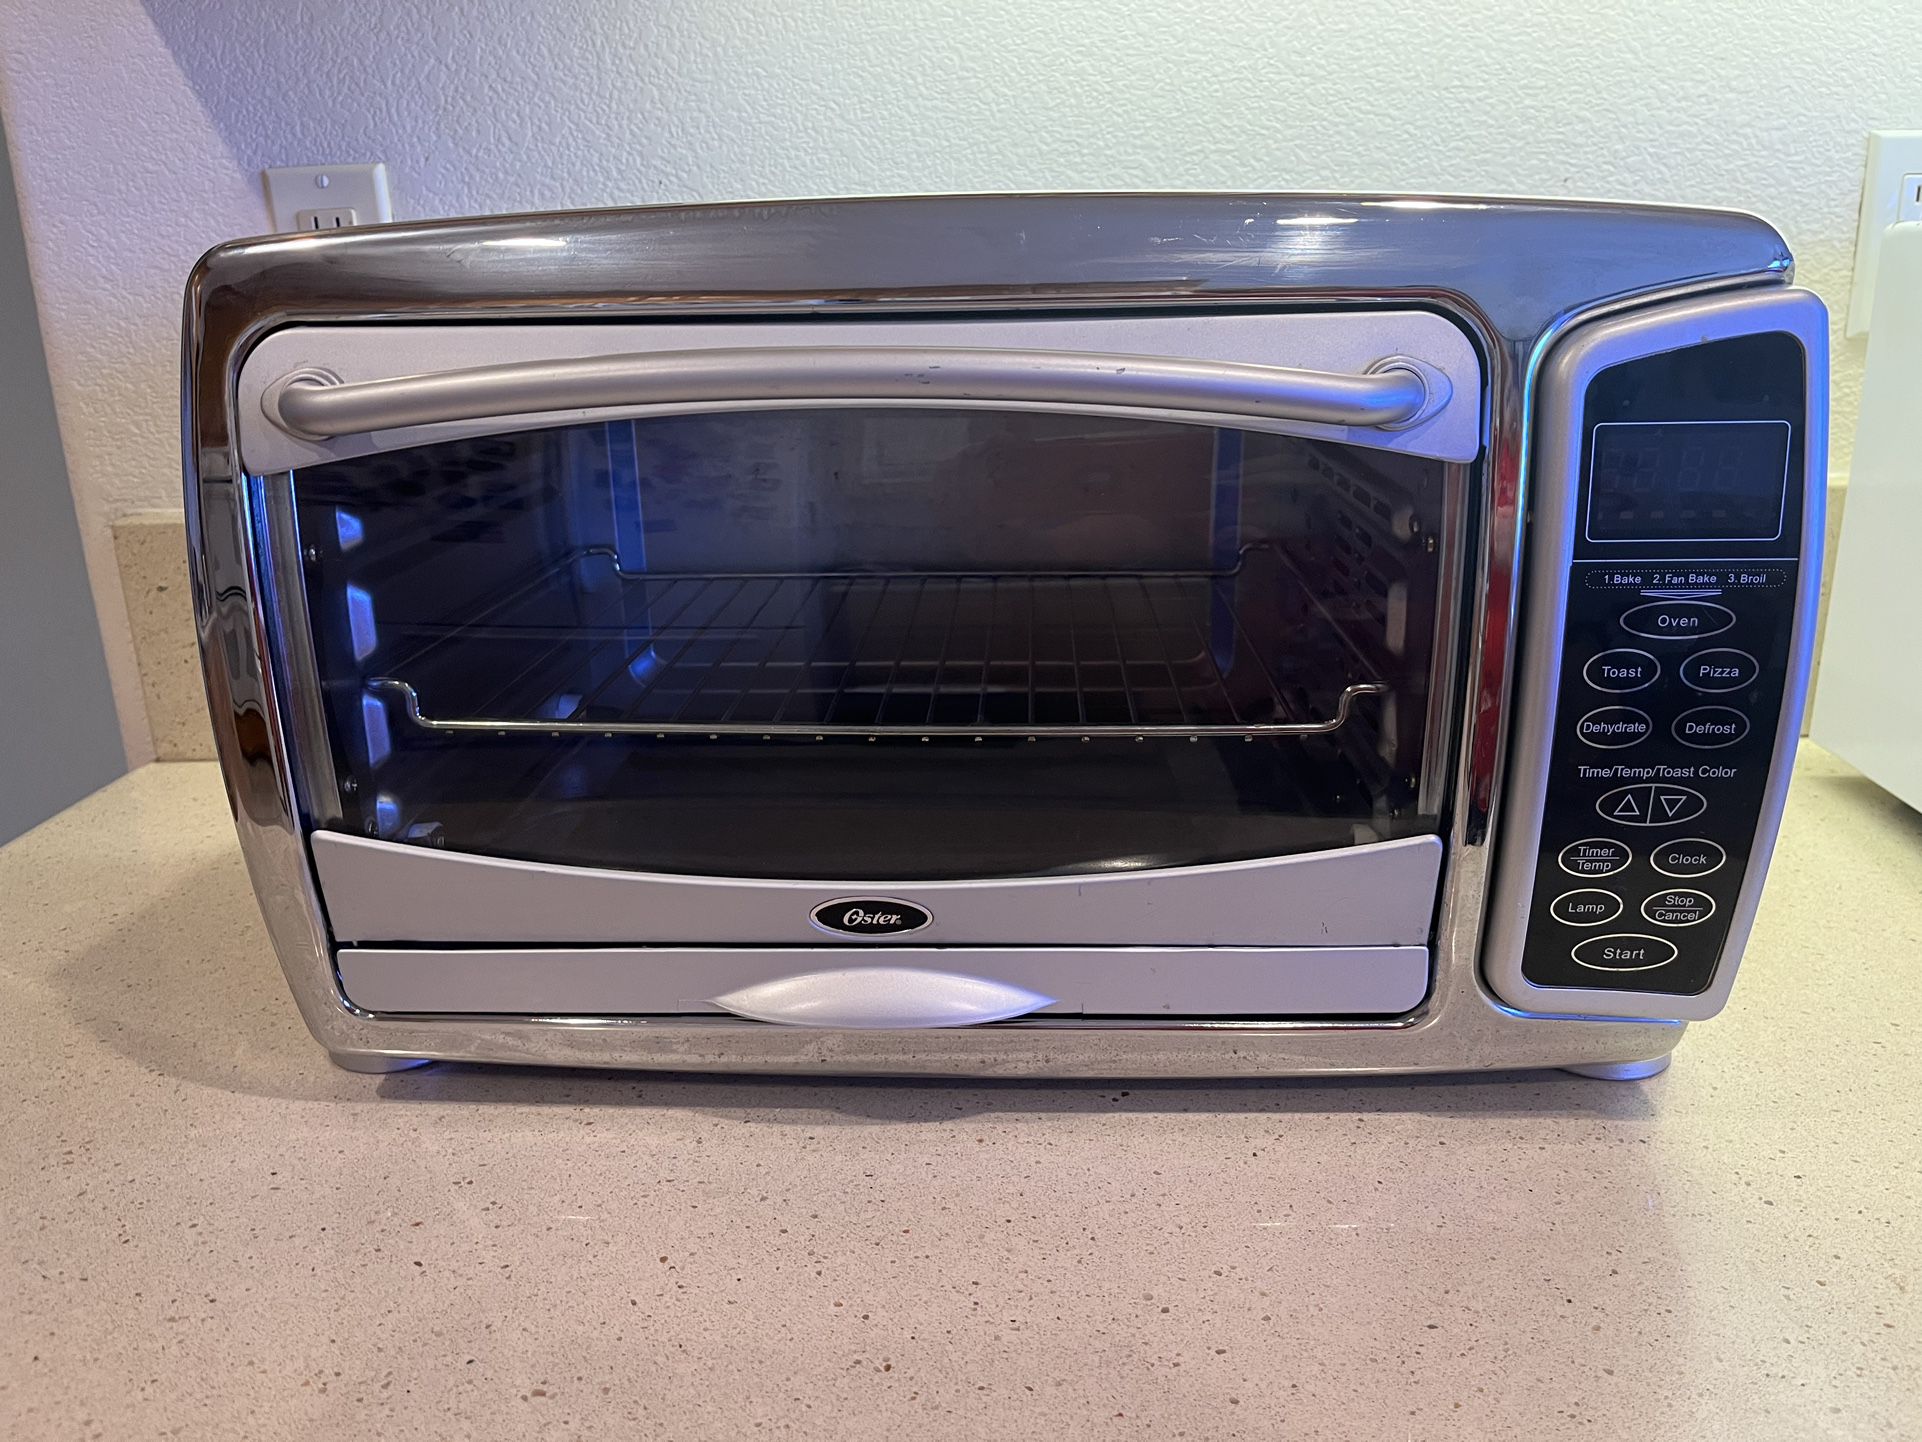 Mueller AeroHeat Convection Toaster Oven for Sale in Clifton Park, NY -  OfferUp